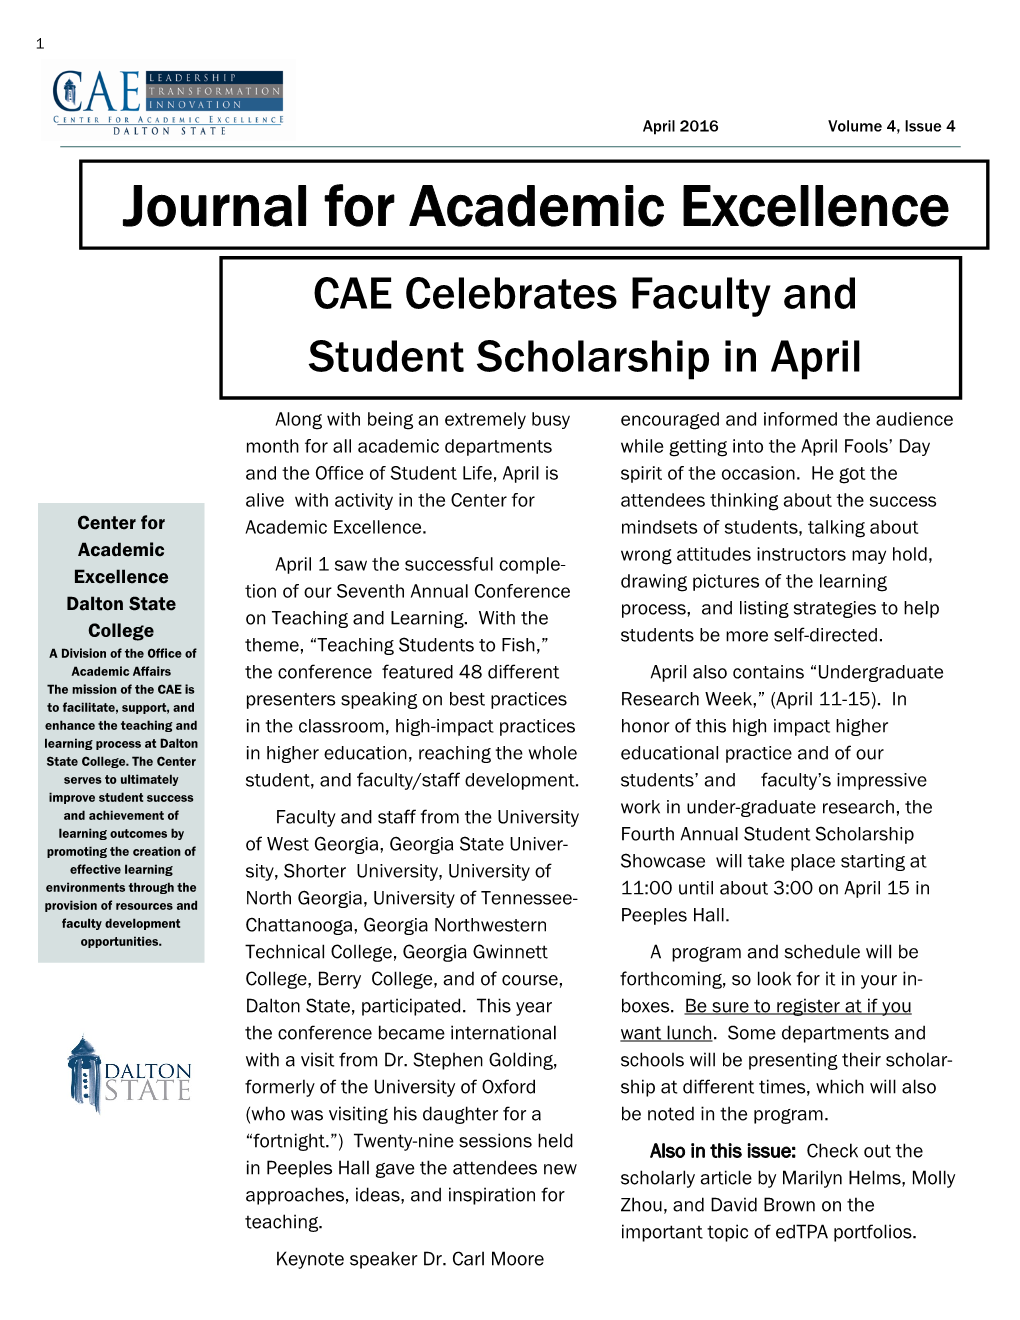 Journal for Academic Excellence CAE Celebrates Faculty and Student Scholarship in April